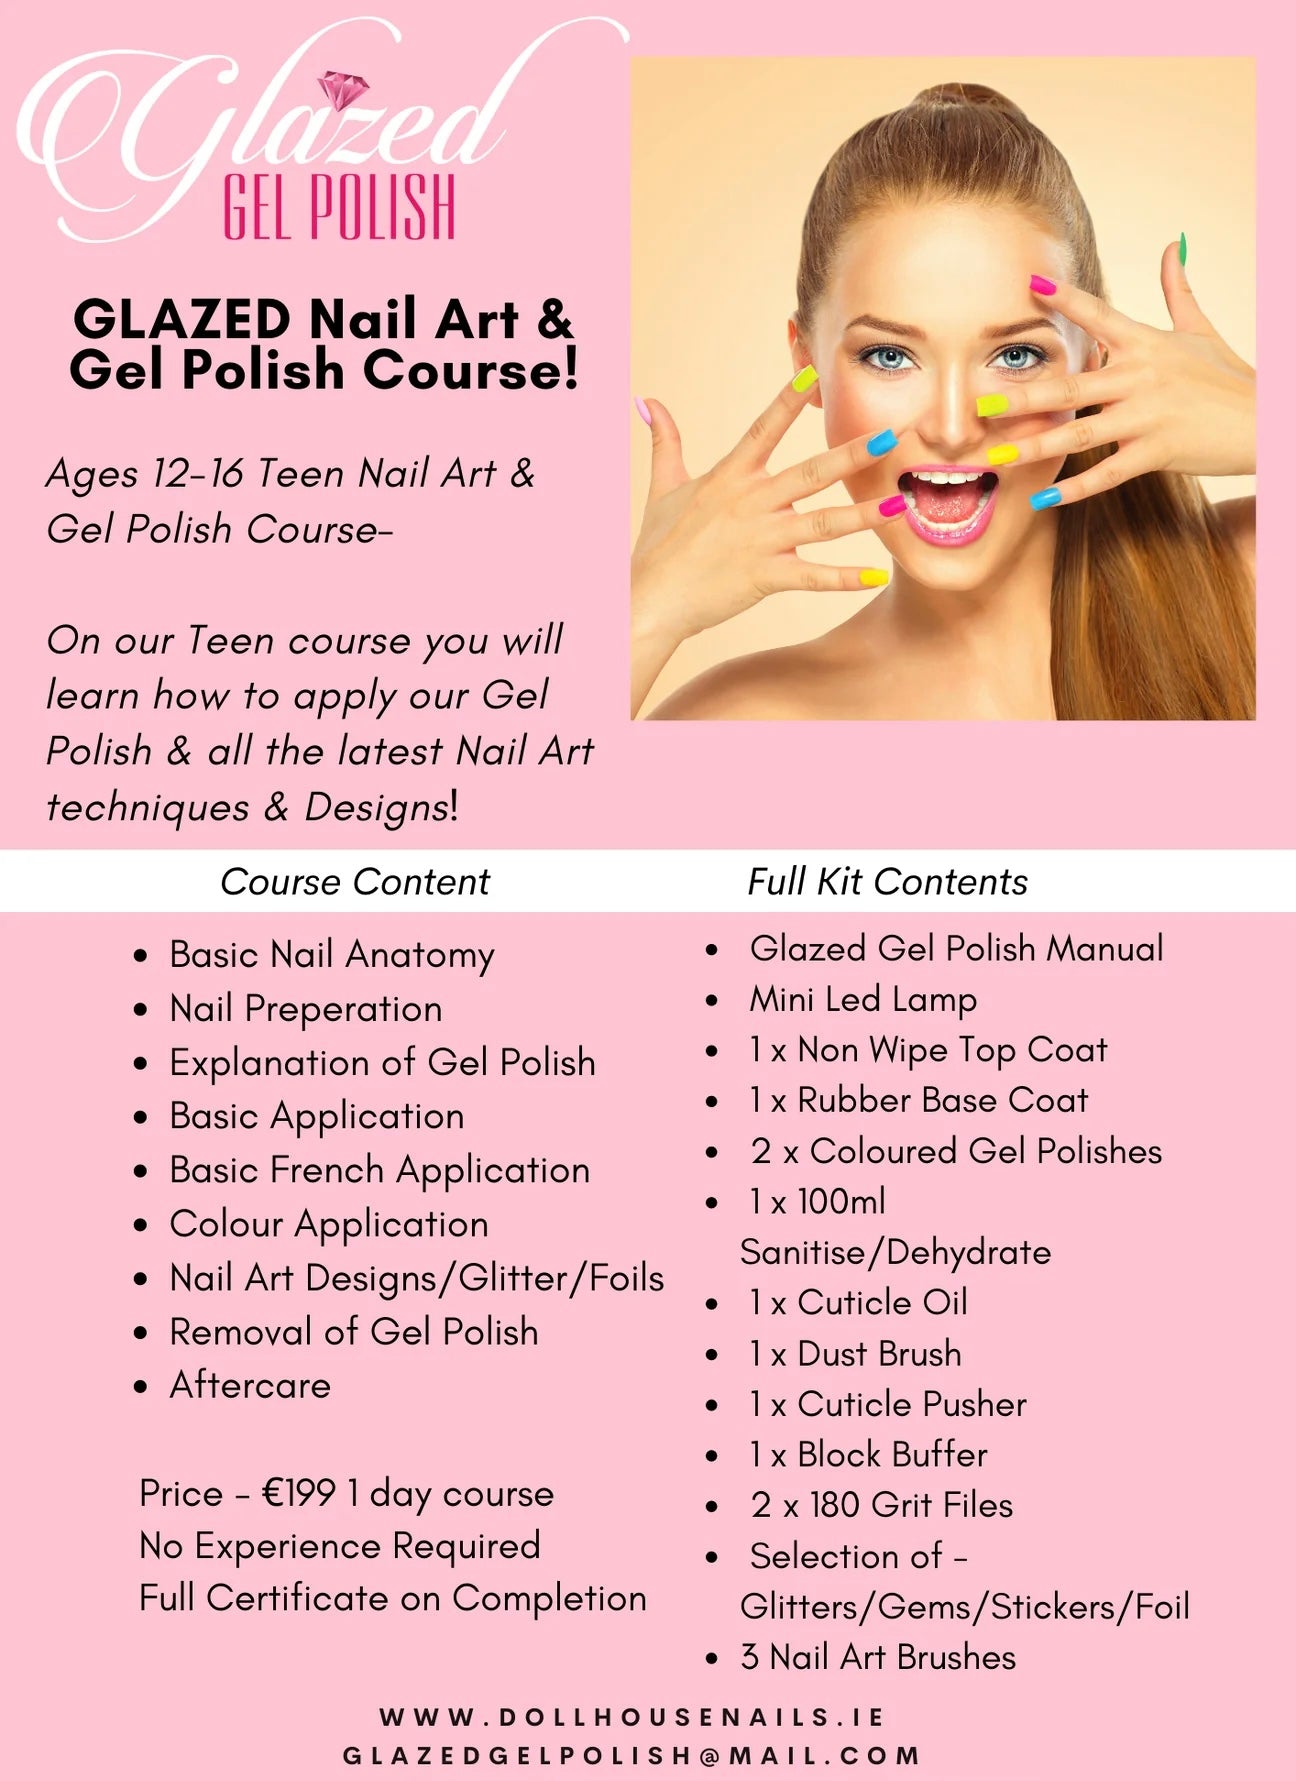 Online Beginners Nail Art Course | The Online Beauty Courses 100+